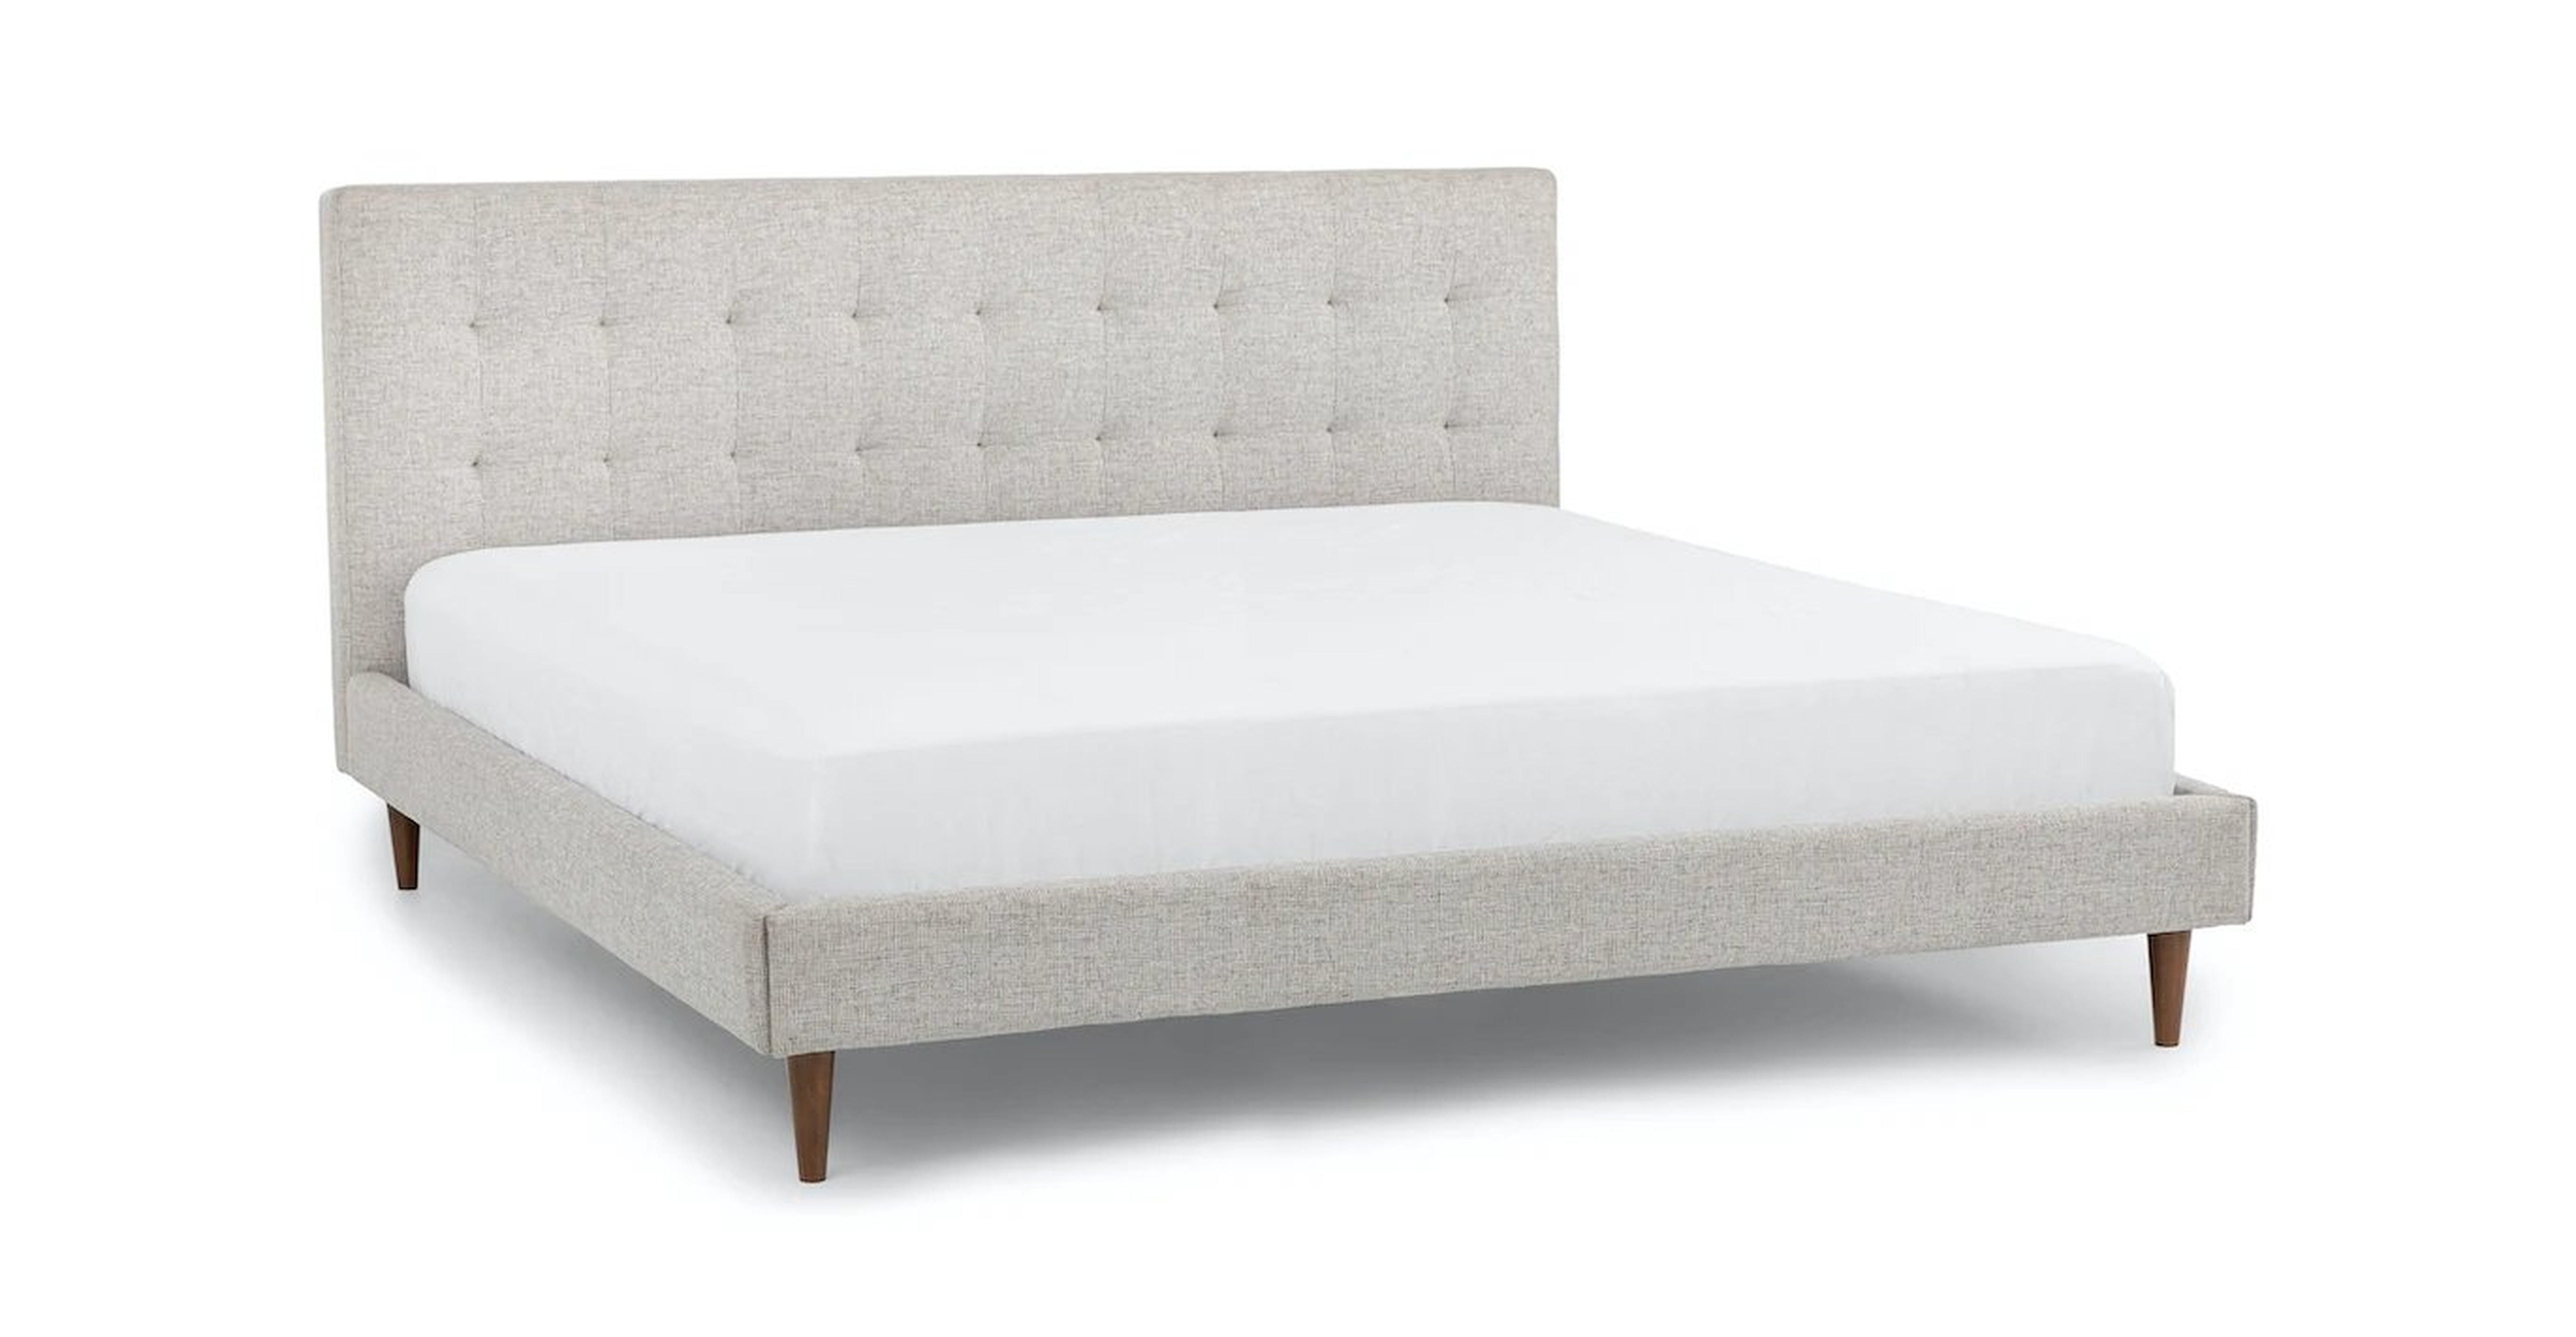 Sven Birch Ivory King Bed - Article